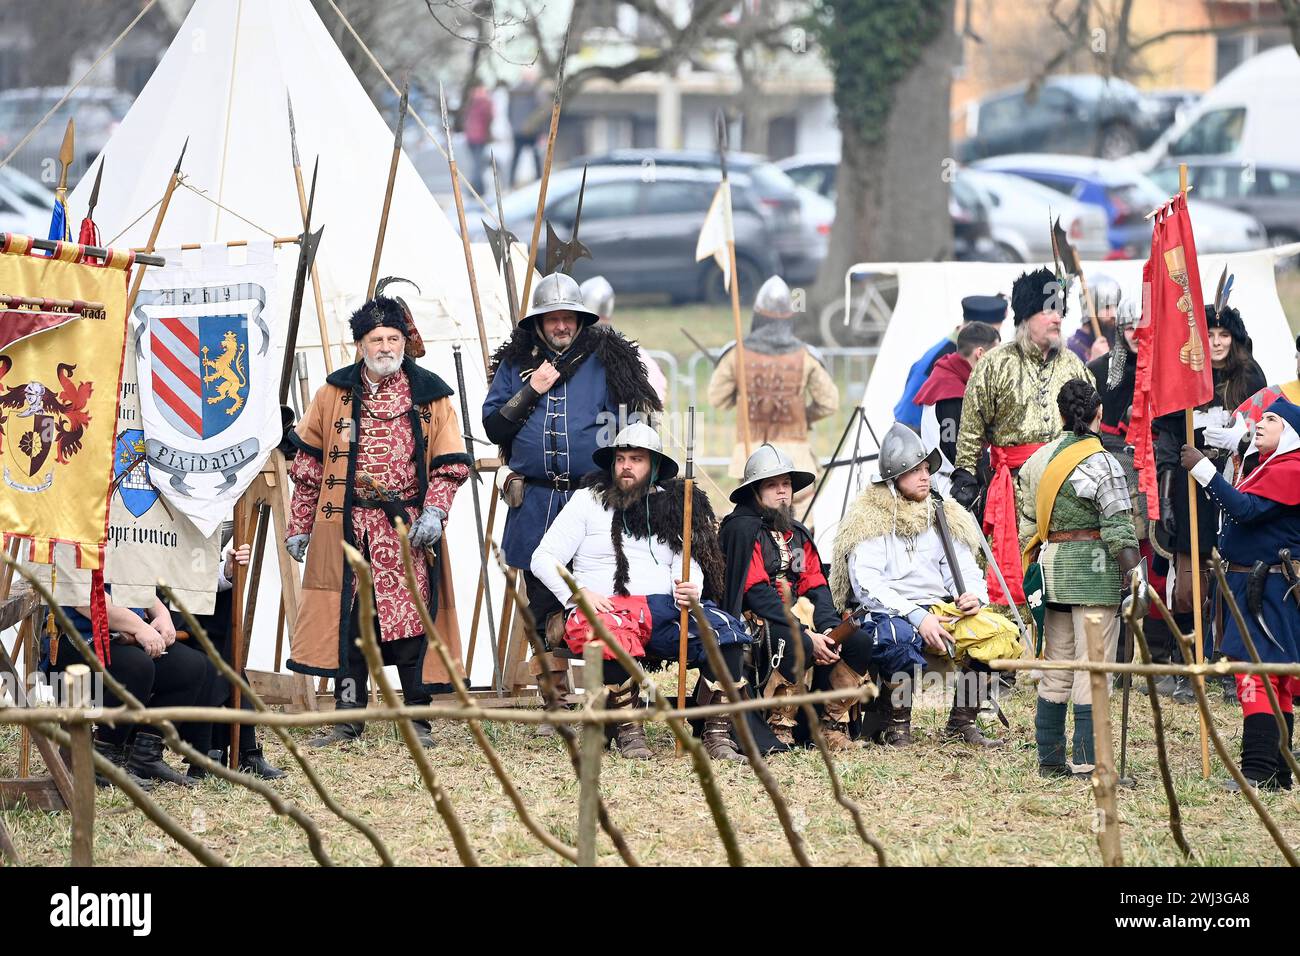 Donja Stubica, Croatia, 100224. Reconstruction of the historical battle between the serfs led by Matija Gubec and the army of the Hungarian-Croatian nobleman Ferenc Franjo Tahi from 1573, which marks the 451st anniversary of the Peasants Revolt in Donja Stubica. Photo: Ronald Gorsic / CROPIX Copyright: xxRonaldxGorsicx/xCROPIXx seljacka buna23-100224 Stock Photo